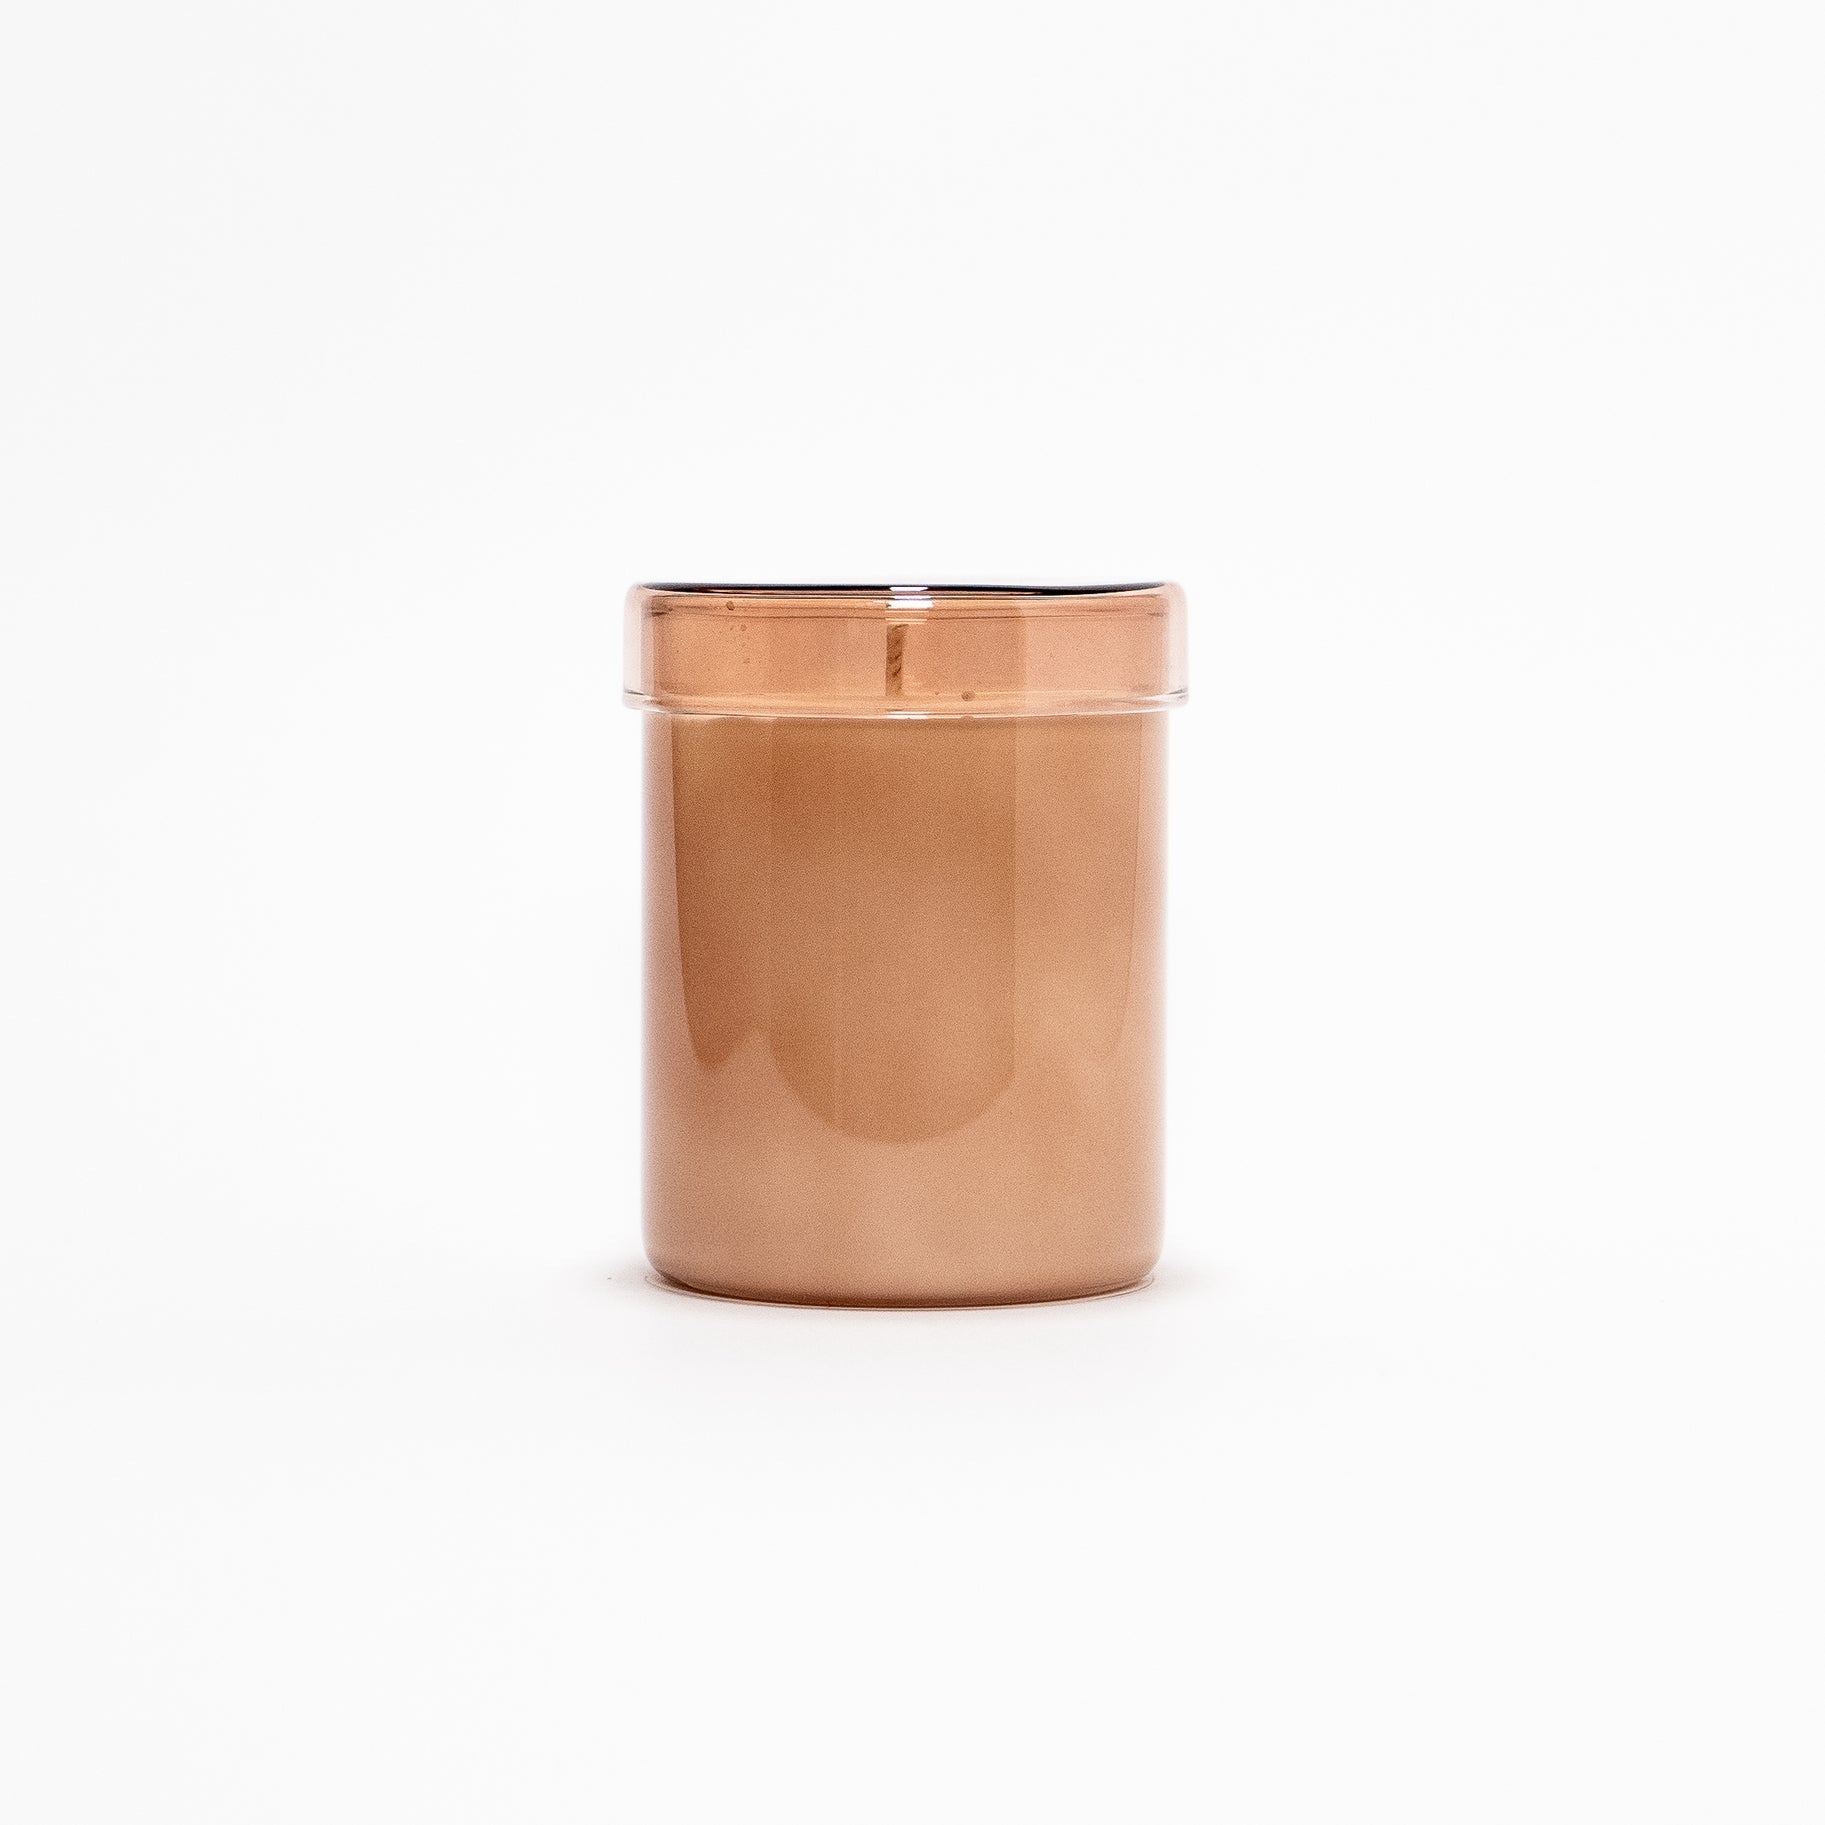 The Florist Glass Candle